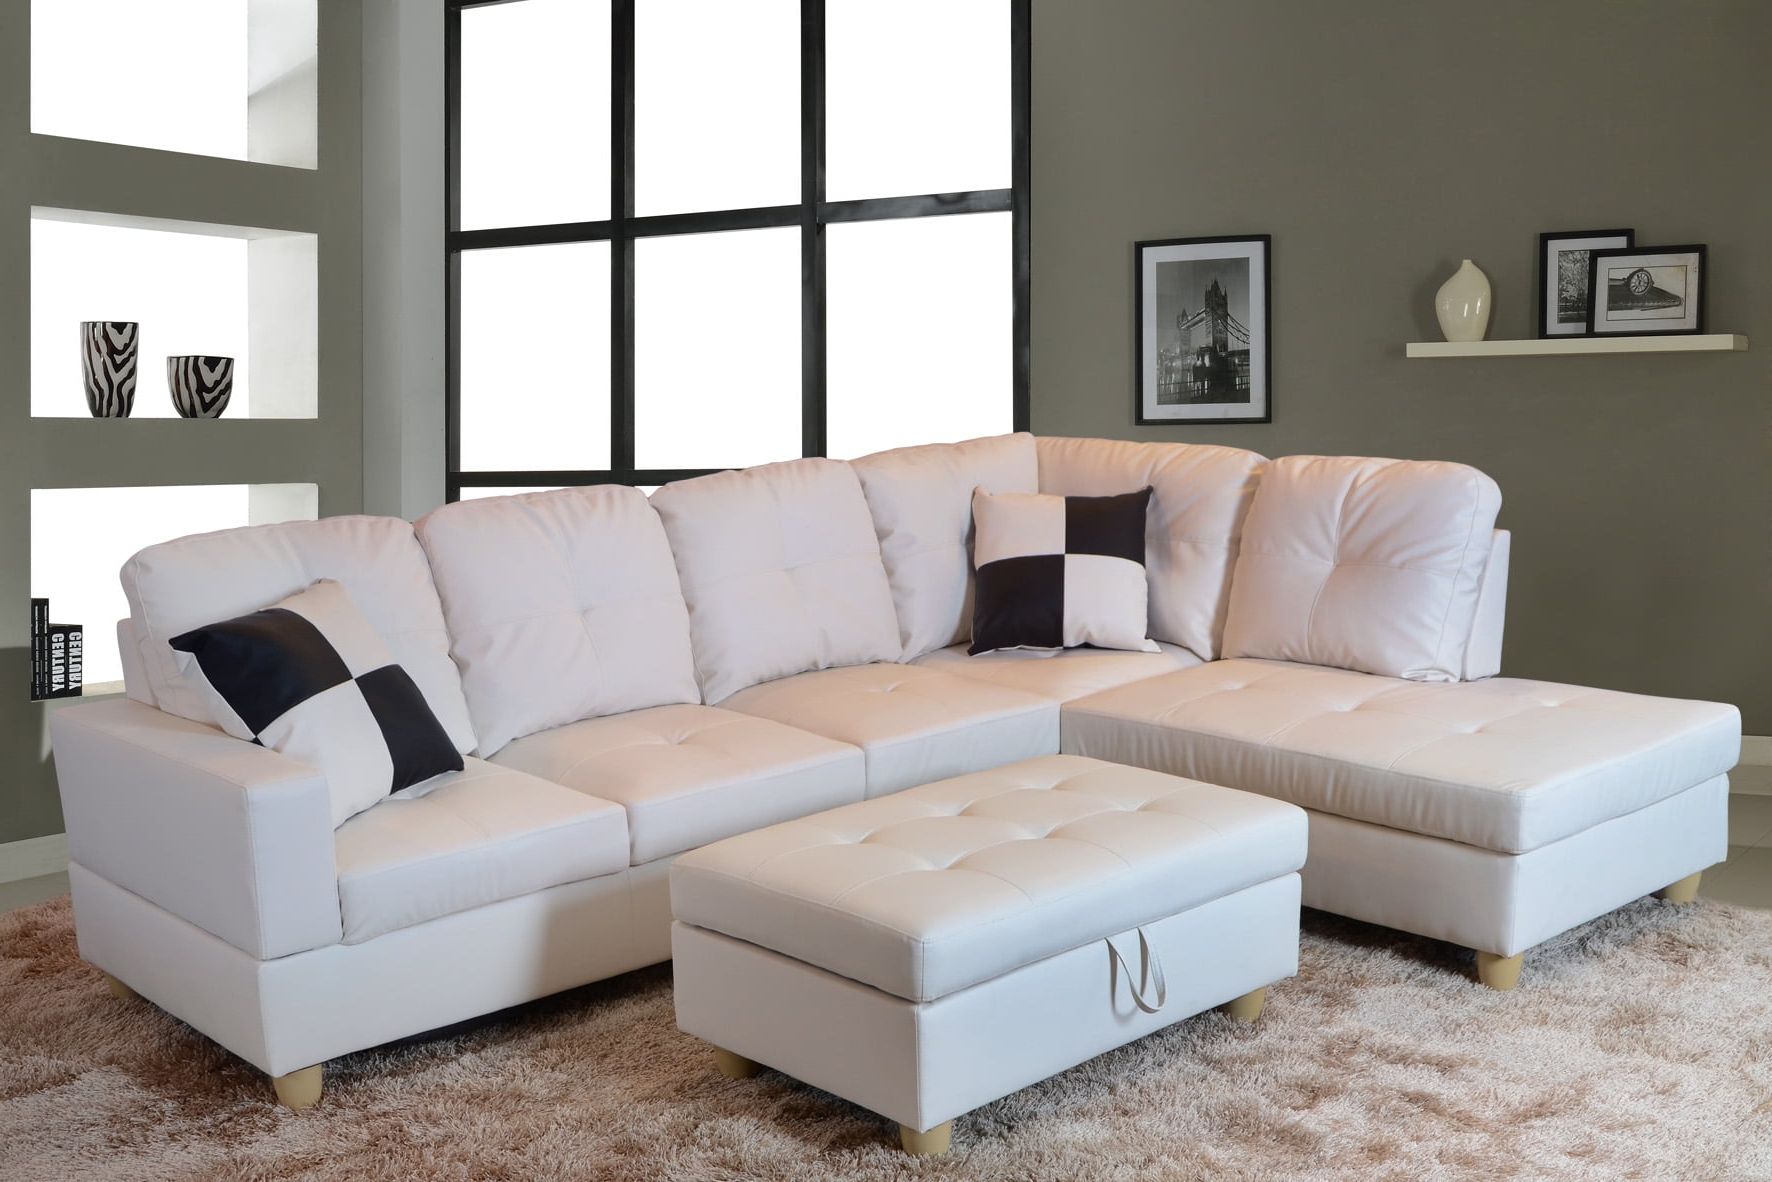 Ponliving Furniture L Shape Traditional Sectional Sofa Set With Ottoman Throughout Faux Leather Sectional Sofa Sets (View 11 of 20)